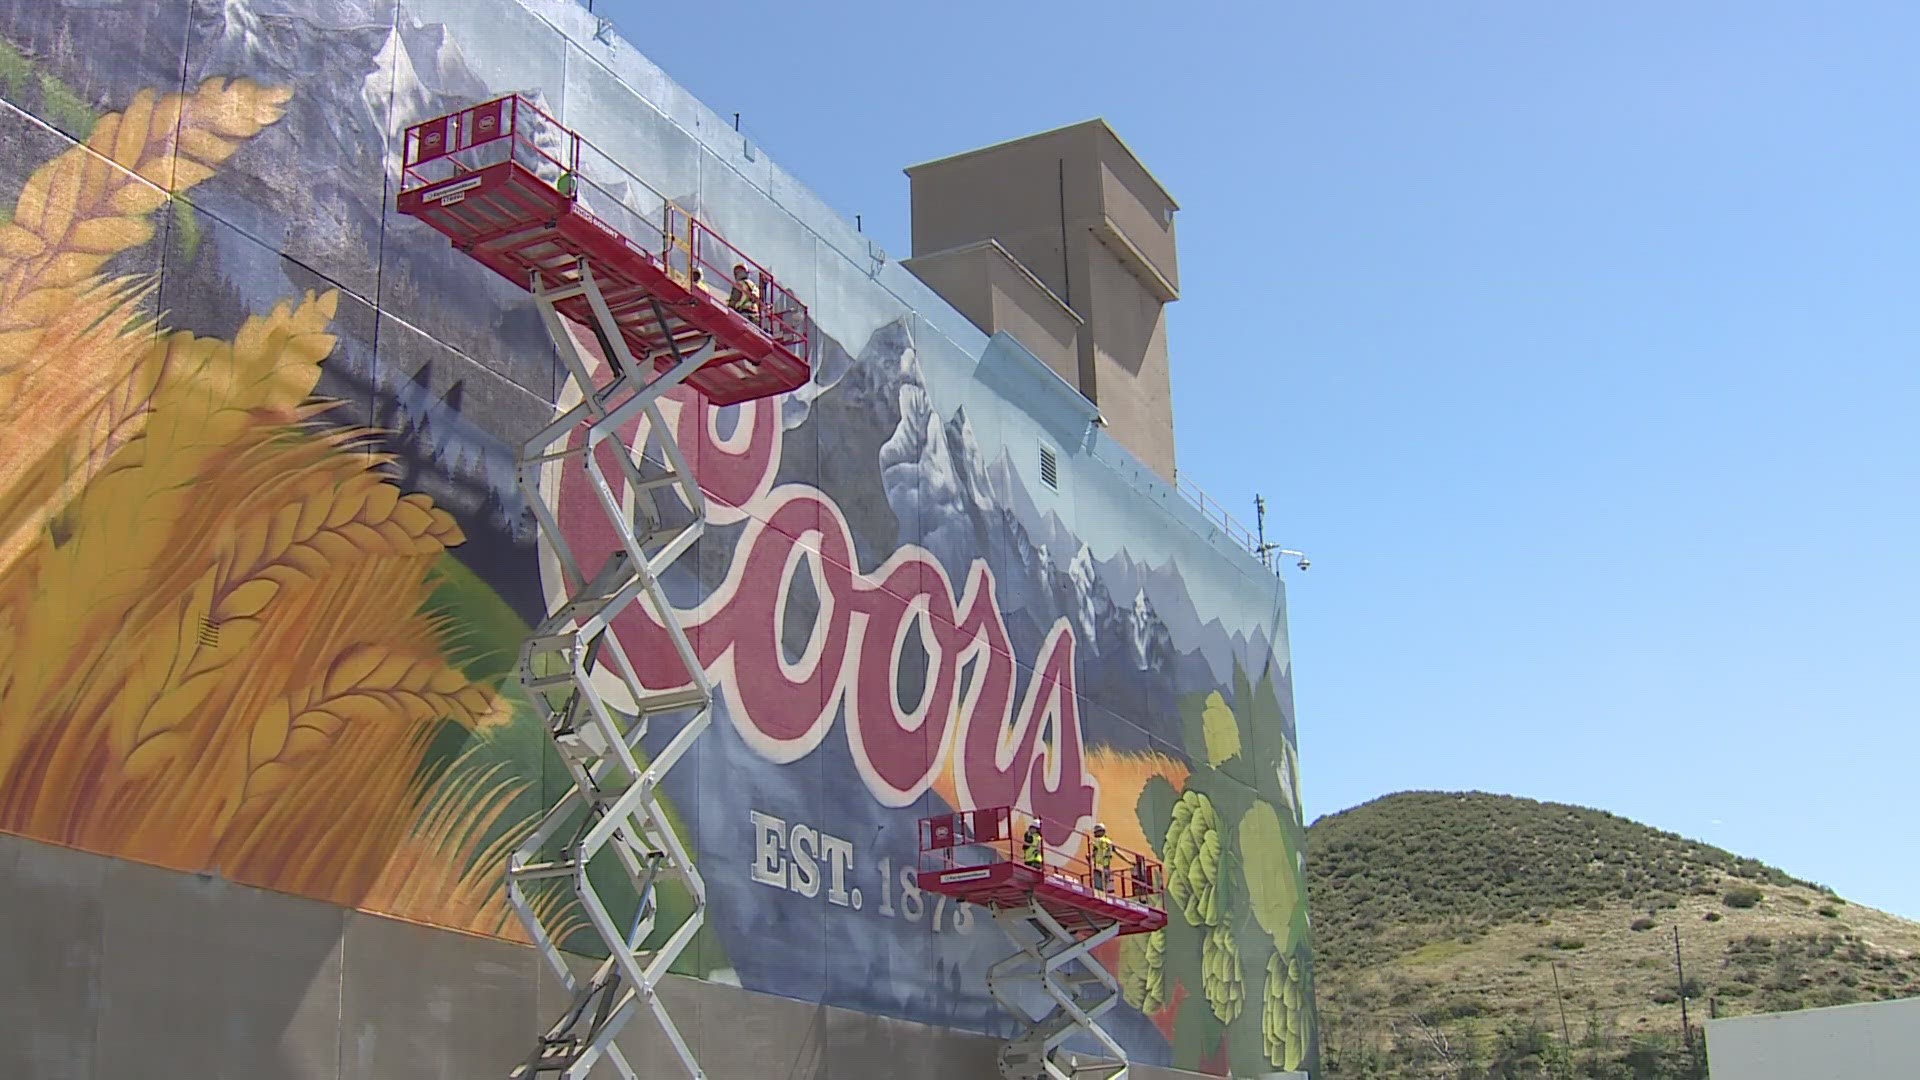 Designed by Arvada native Julia Williams (aka The Designosaur), the 45-foot high and 165-foot wide mural is being added to the west side of the brewery.